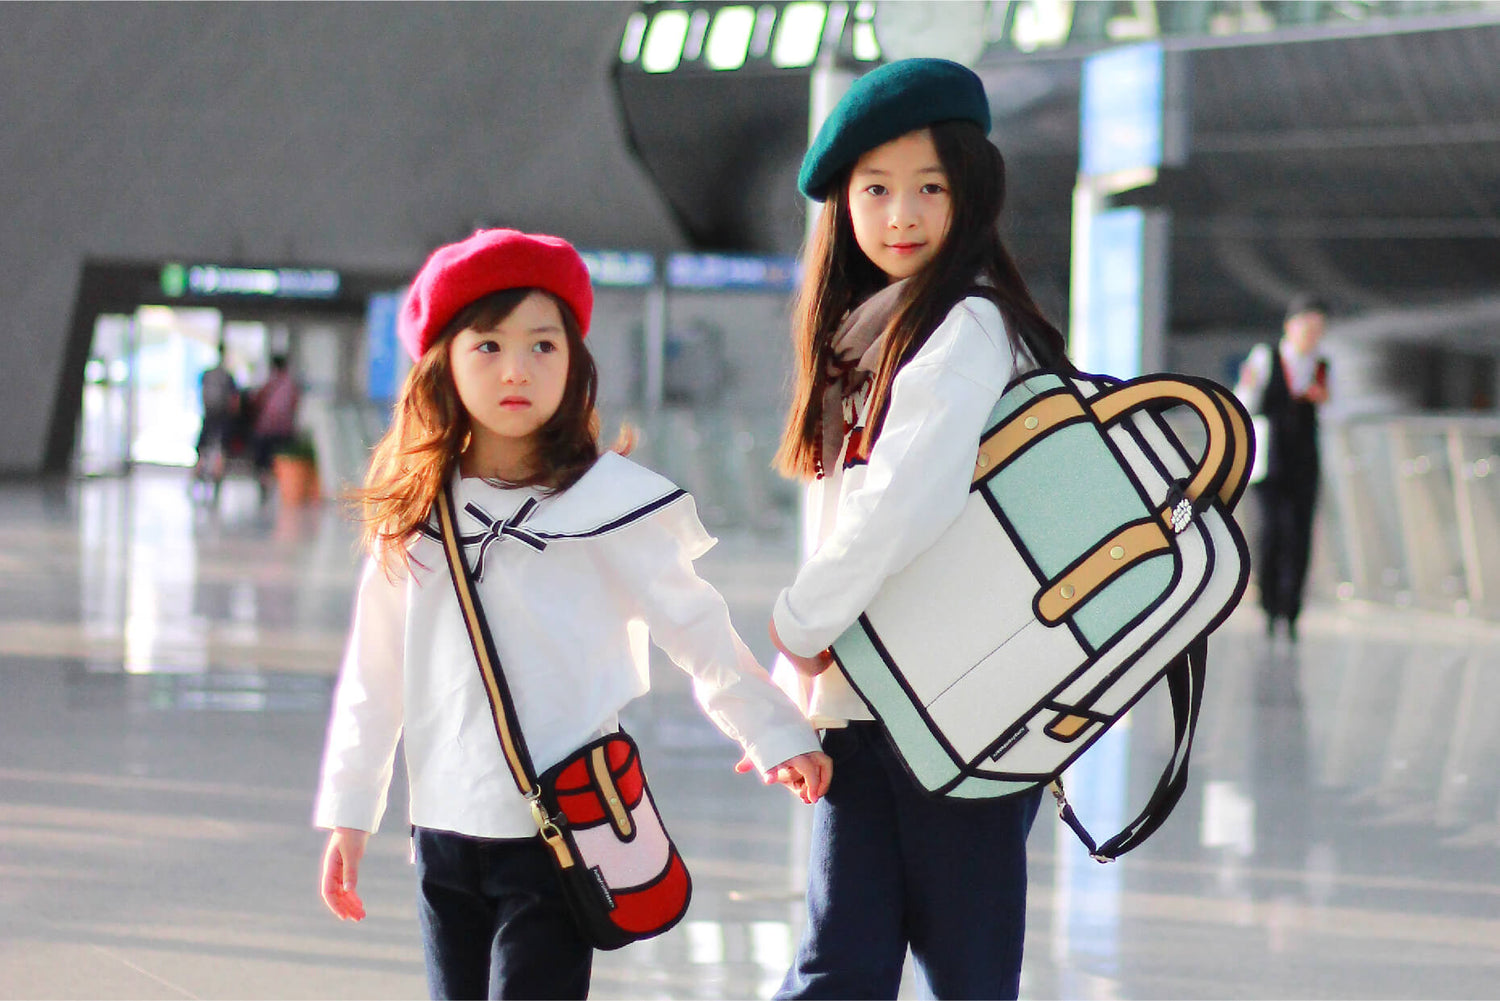 Little Fashion Models' are off to Okinawa with our cute cartoon bags